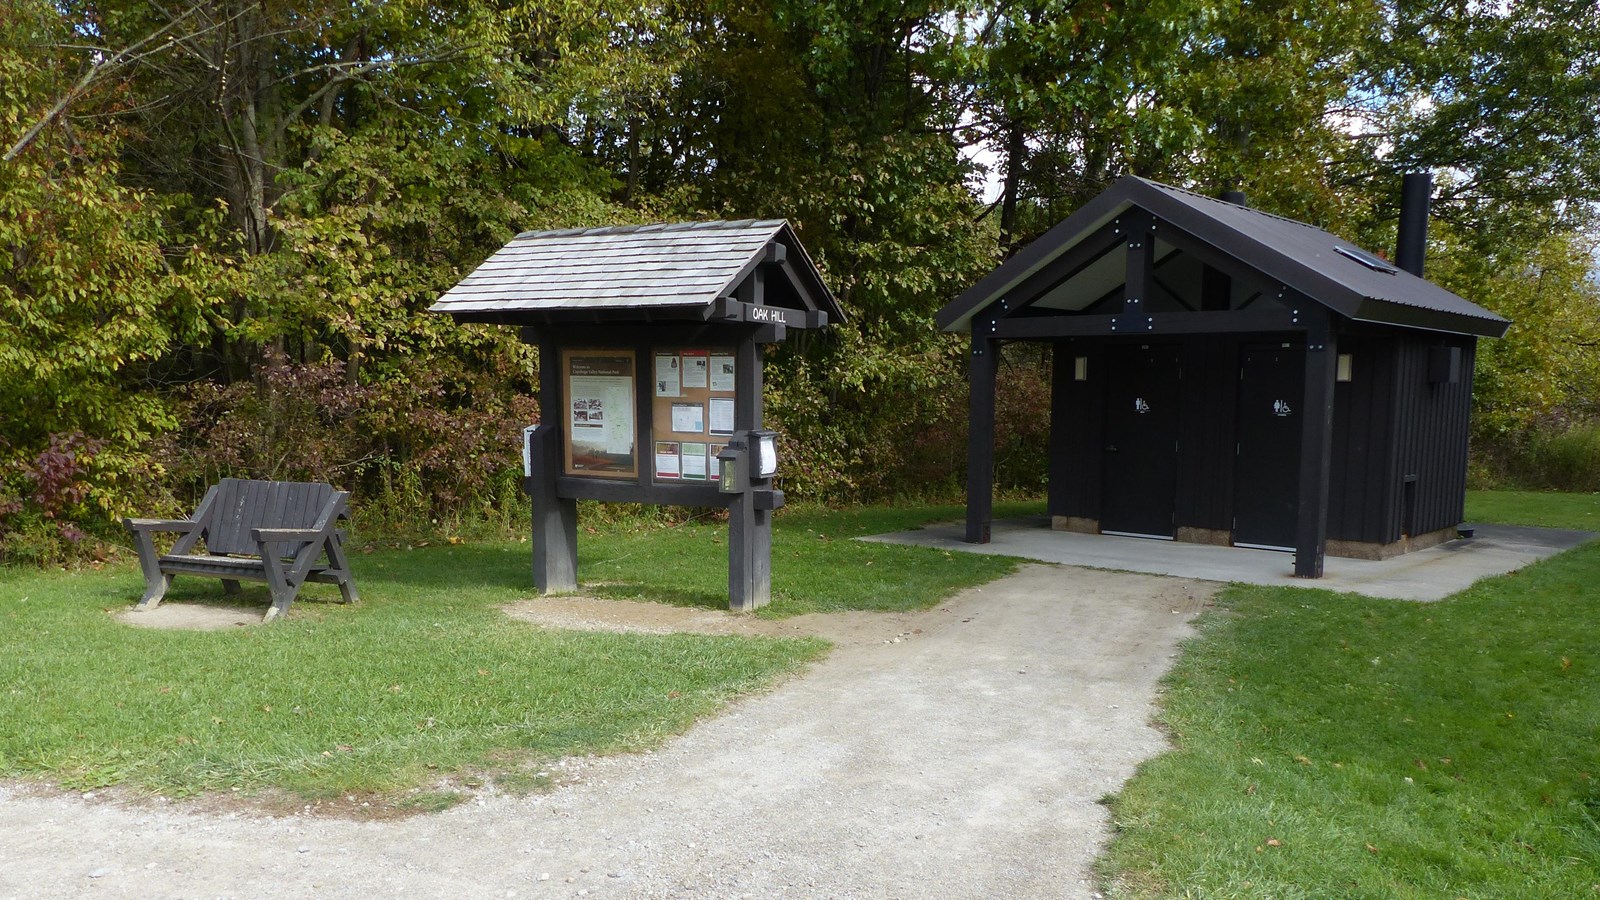 “Oak Hill” kiosk stands between a wooden bench and a two door restroom with trees in the background.